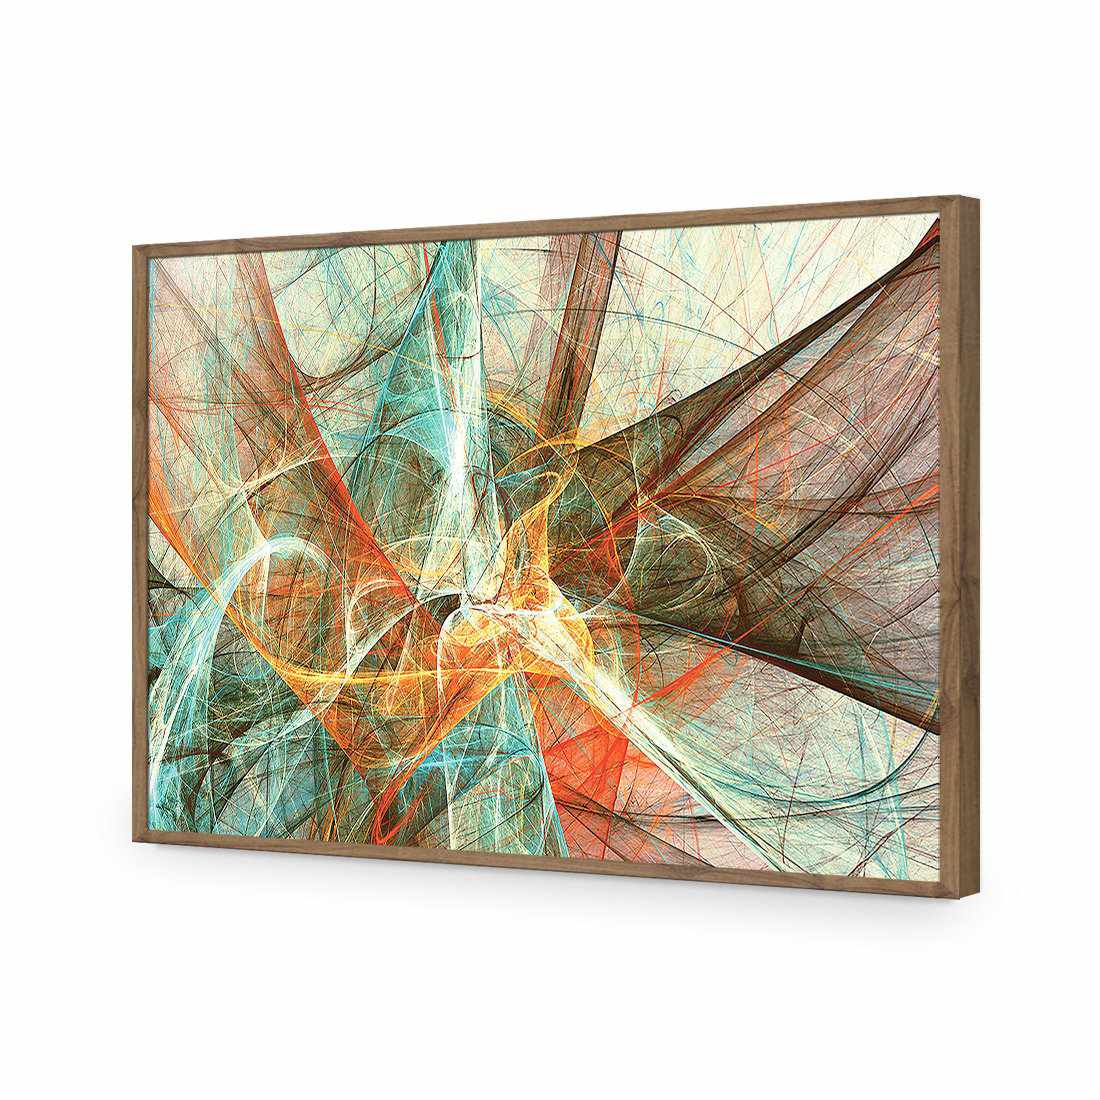 Webbed-Acrylic-Wall Art Design-Without Border-Acrylic - Natural Frame-45x30cm-Wall Art Designs